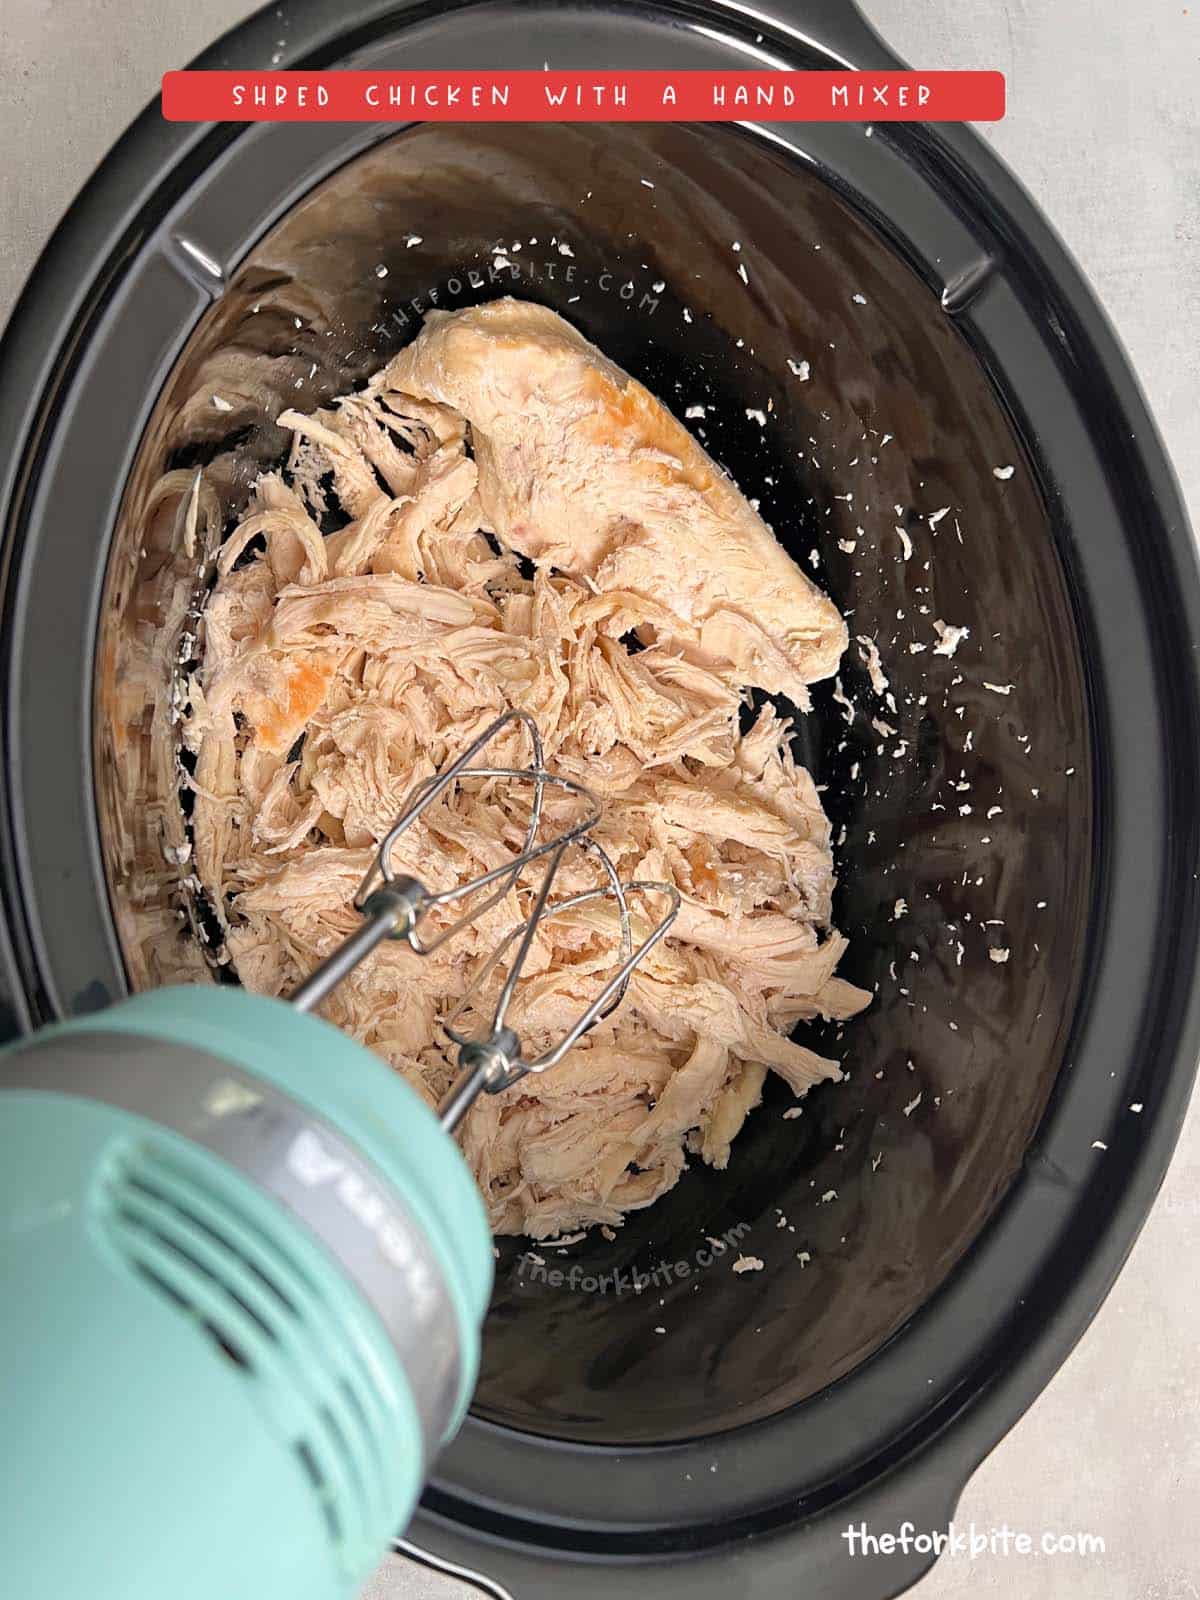 This is the quickest and easiest way to shred chicken. Place cooked chicken into a large mixing bowl and use a hand mixer on low speed to break the meat. This method is perfect, especially for large quantities of chicken.